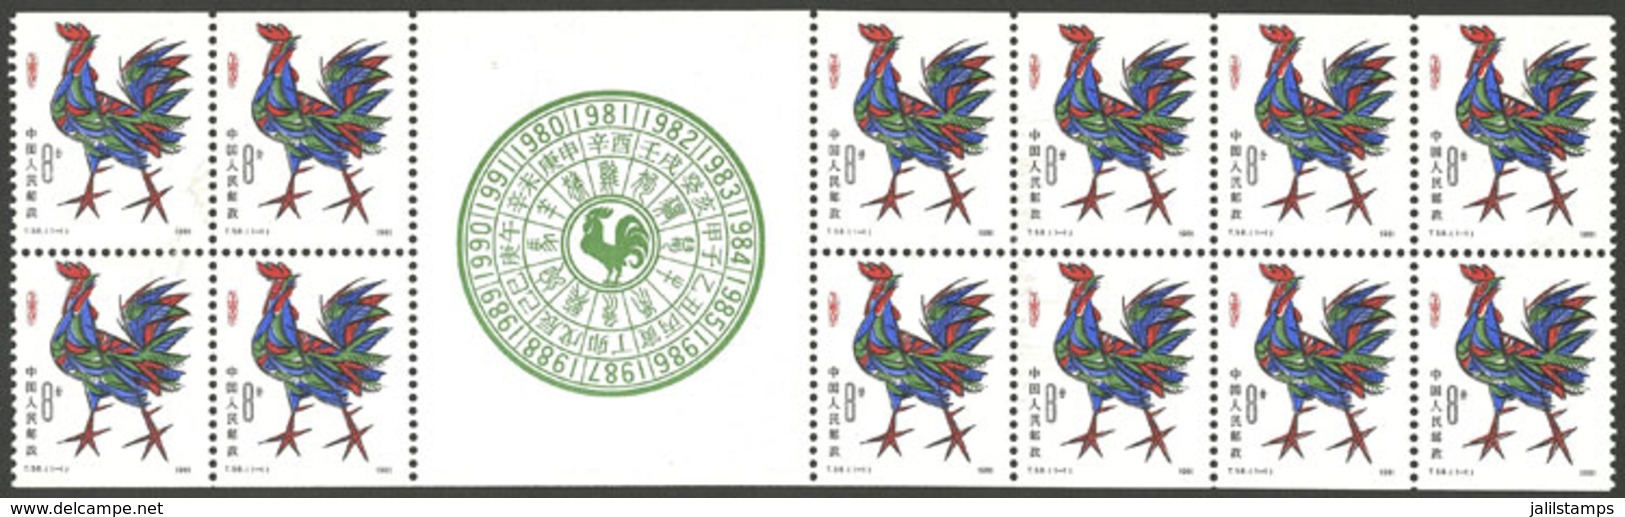 CHINA: Sc.1647a, 1981 Year Of The Rooster, MNH Block Of 12 Stamps, VF Quality! - Oblitérés